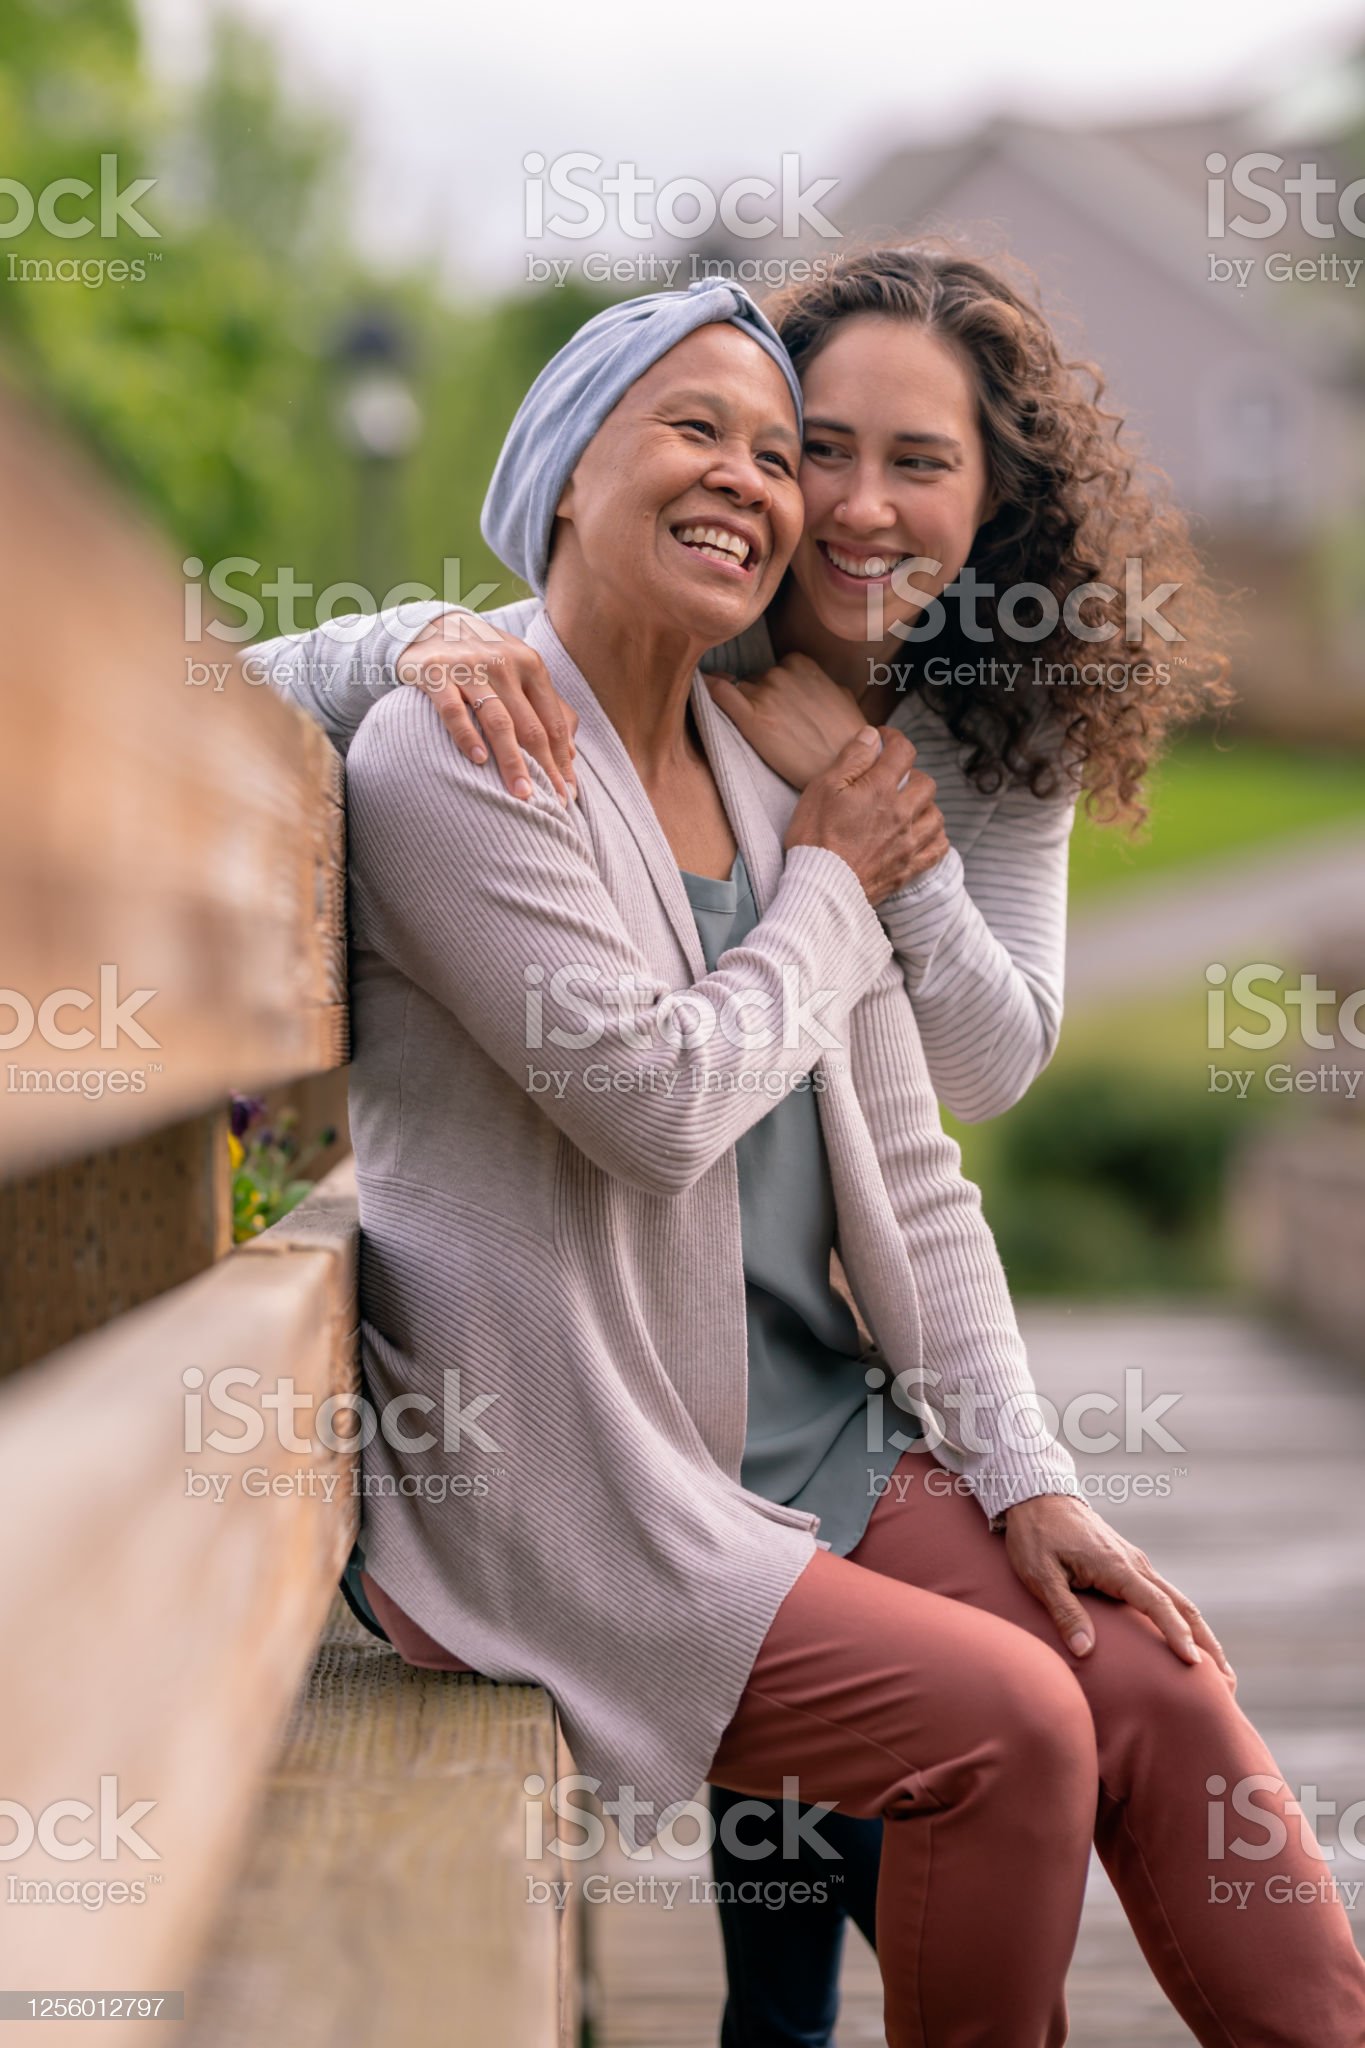 A senior woman with cancer is embraced and comforted by her adult daughter as they stand outside on a spring evening. Both have serious but content expressions as they savor their time together. Their hands are clasped together.